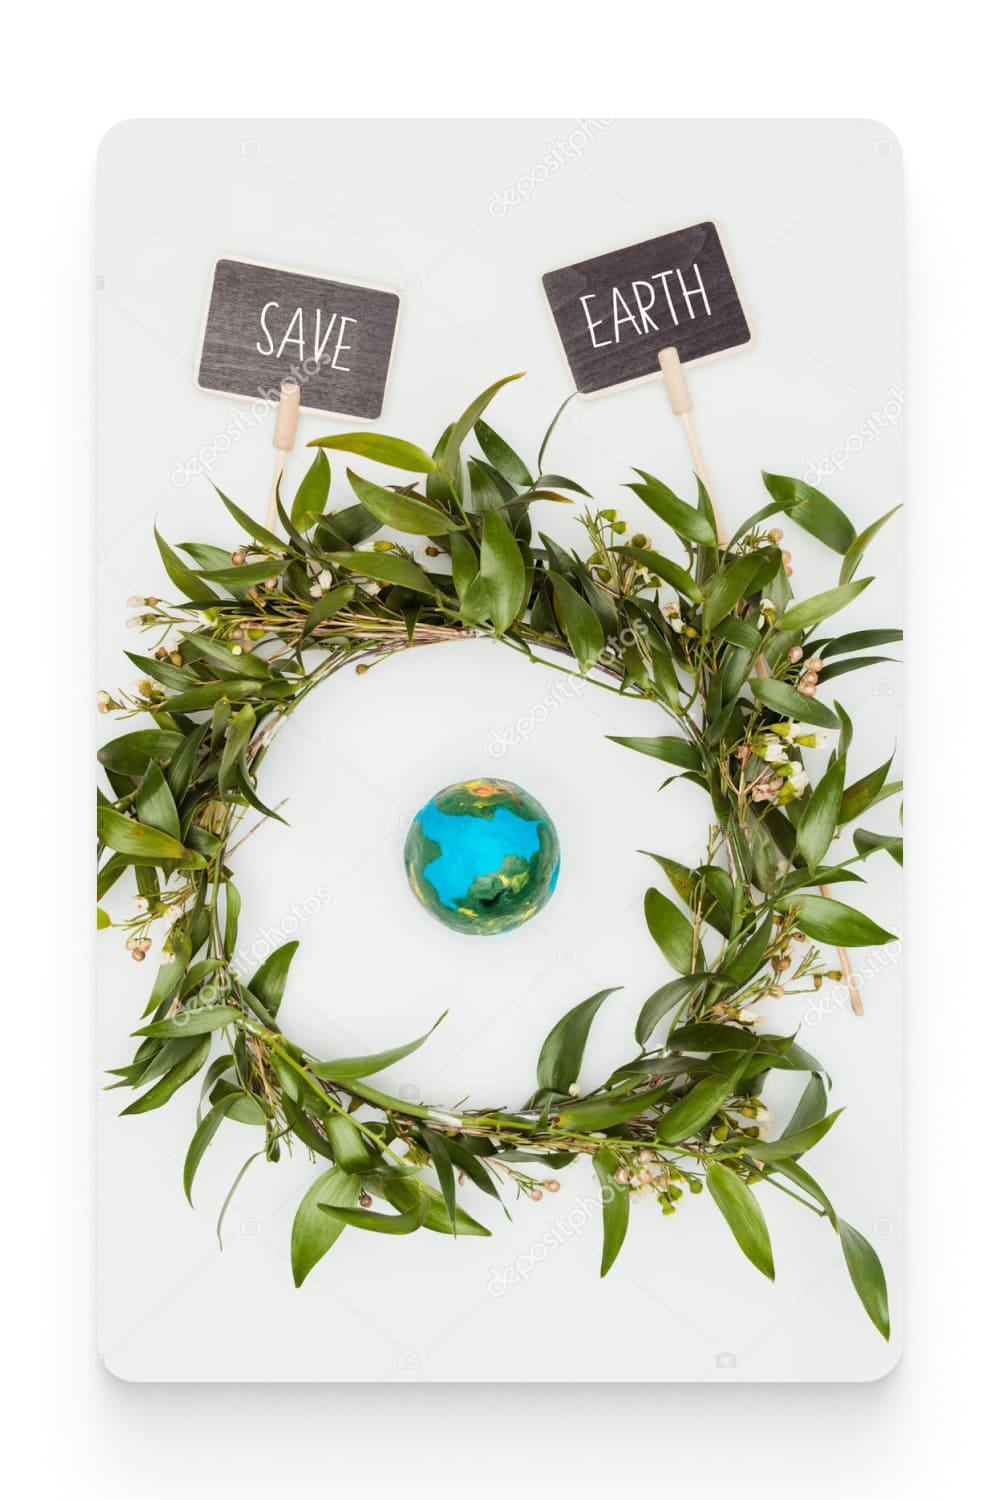 Top view of earth model inside wreath with signs save earth isolated on white.